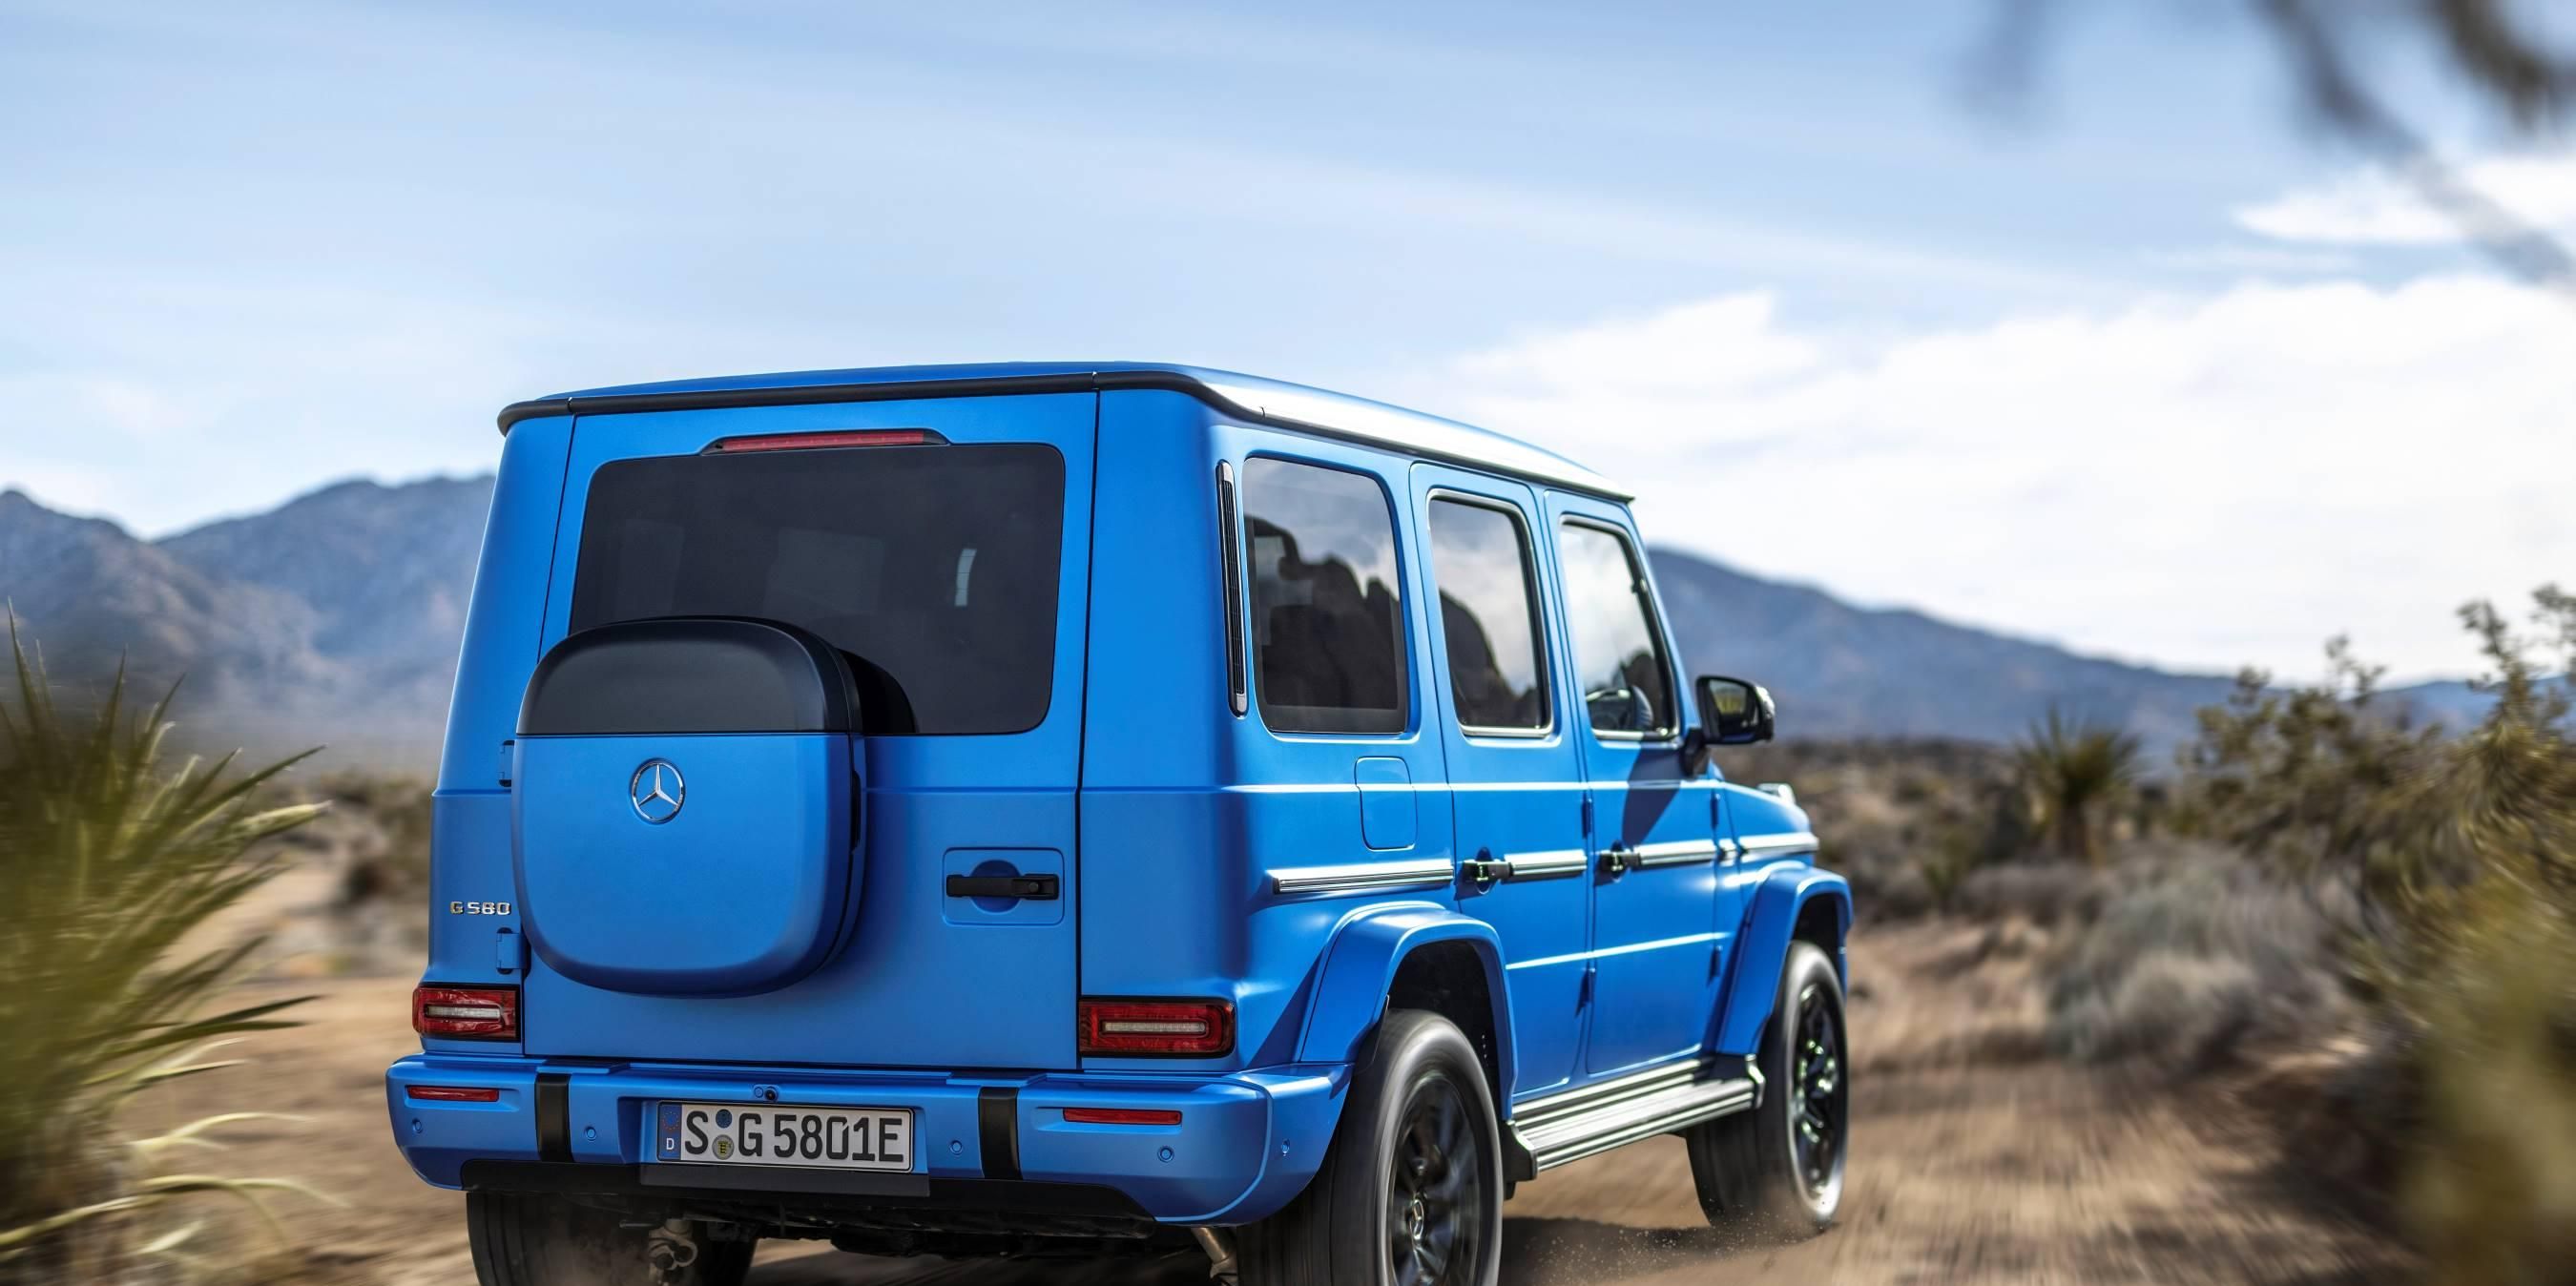 Mercedes G-Class Goes All-Electric but Retains Its Familiar Shape